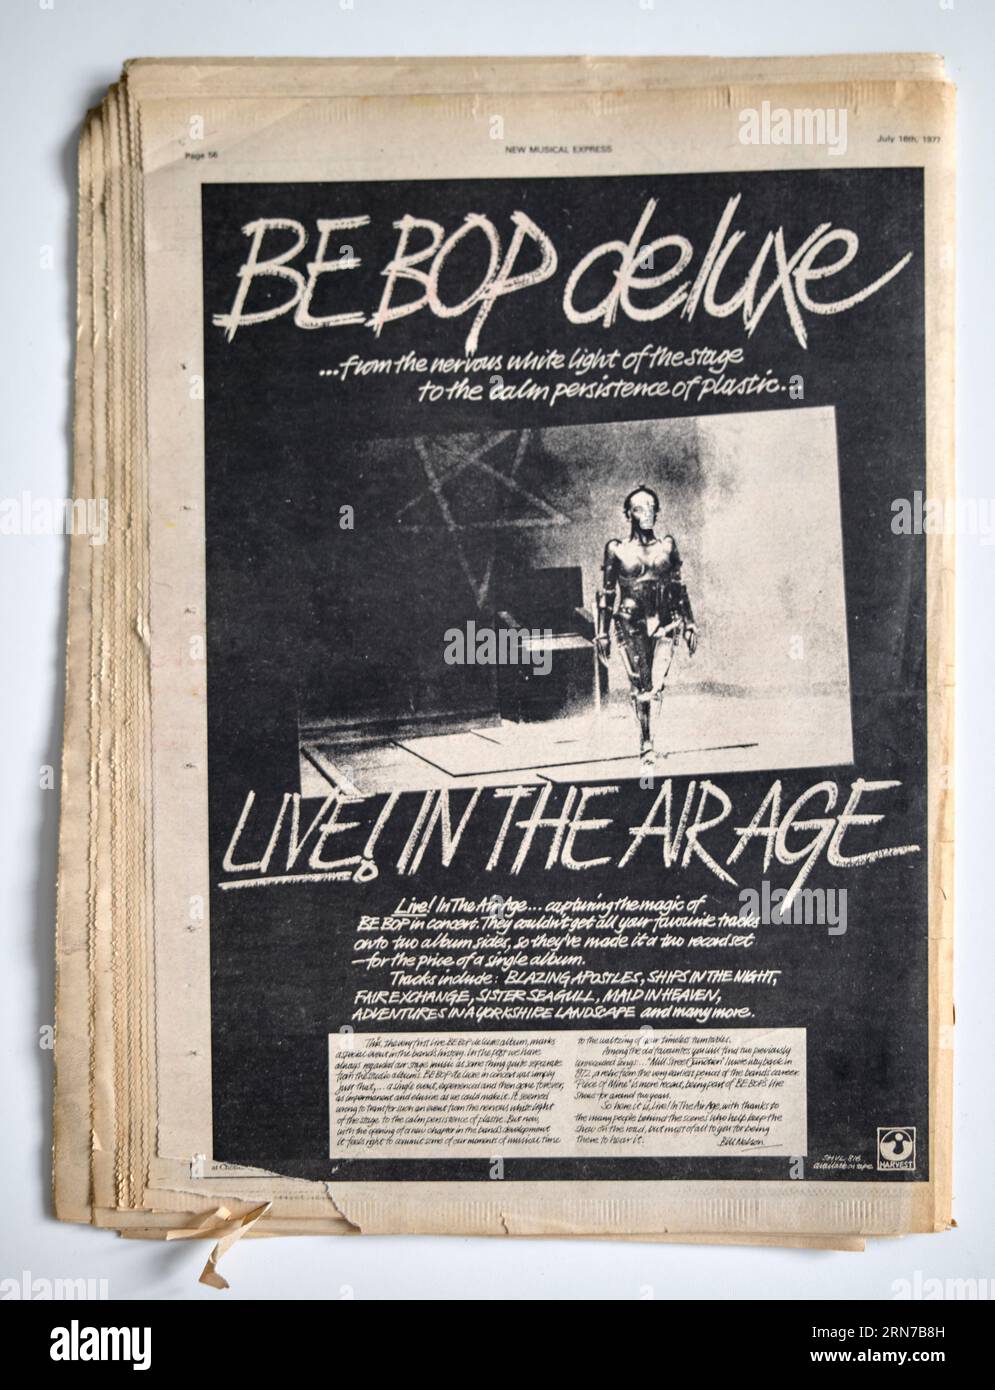 Annuncio per Be Bop Deluxe album "Live in the Air Age" in 1970s New Musical Express NME Magazine Foto Stock